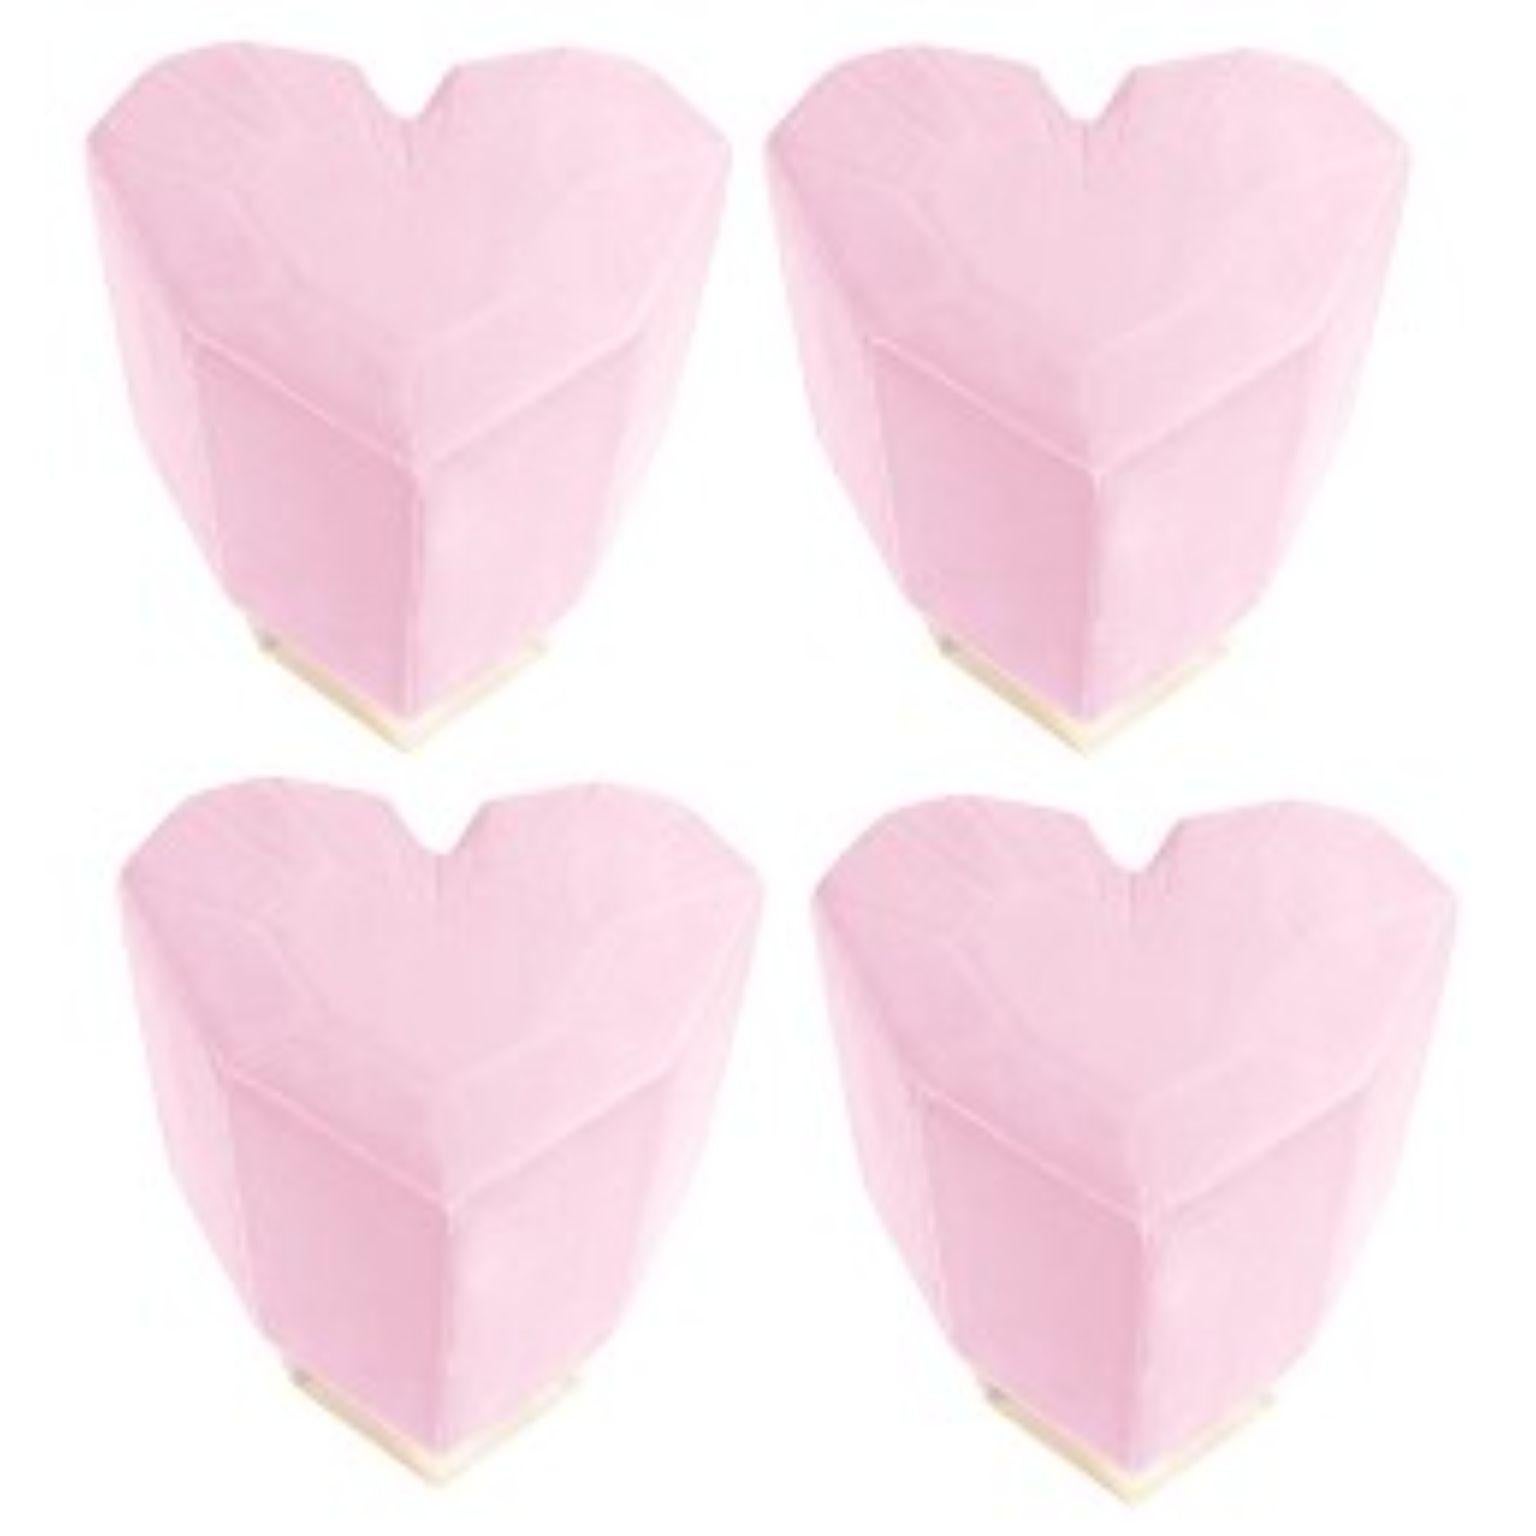 Set of 4 Light Pink Queen Heart Stools by Royal Stranger
Dimensions: 46 x 49 x 43 cm
Different upholstery colors and finishes are available. Brass, copper or stainless steel in polished or brushed finish.
Materials: velvet heart shape upholstery